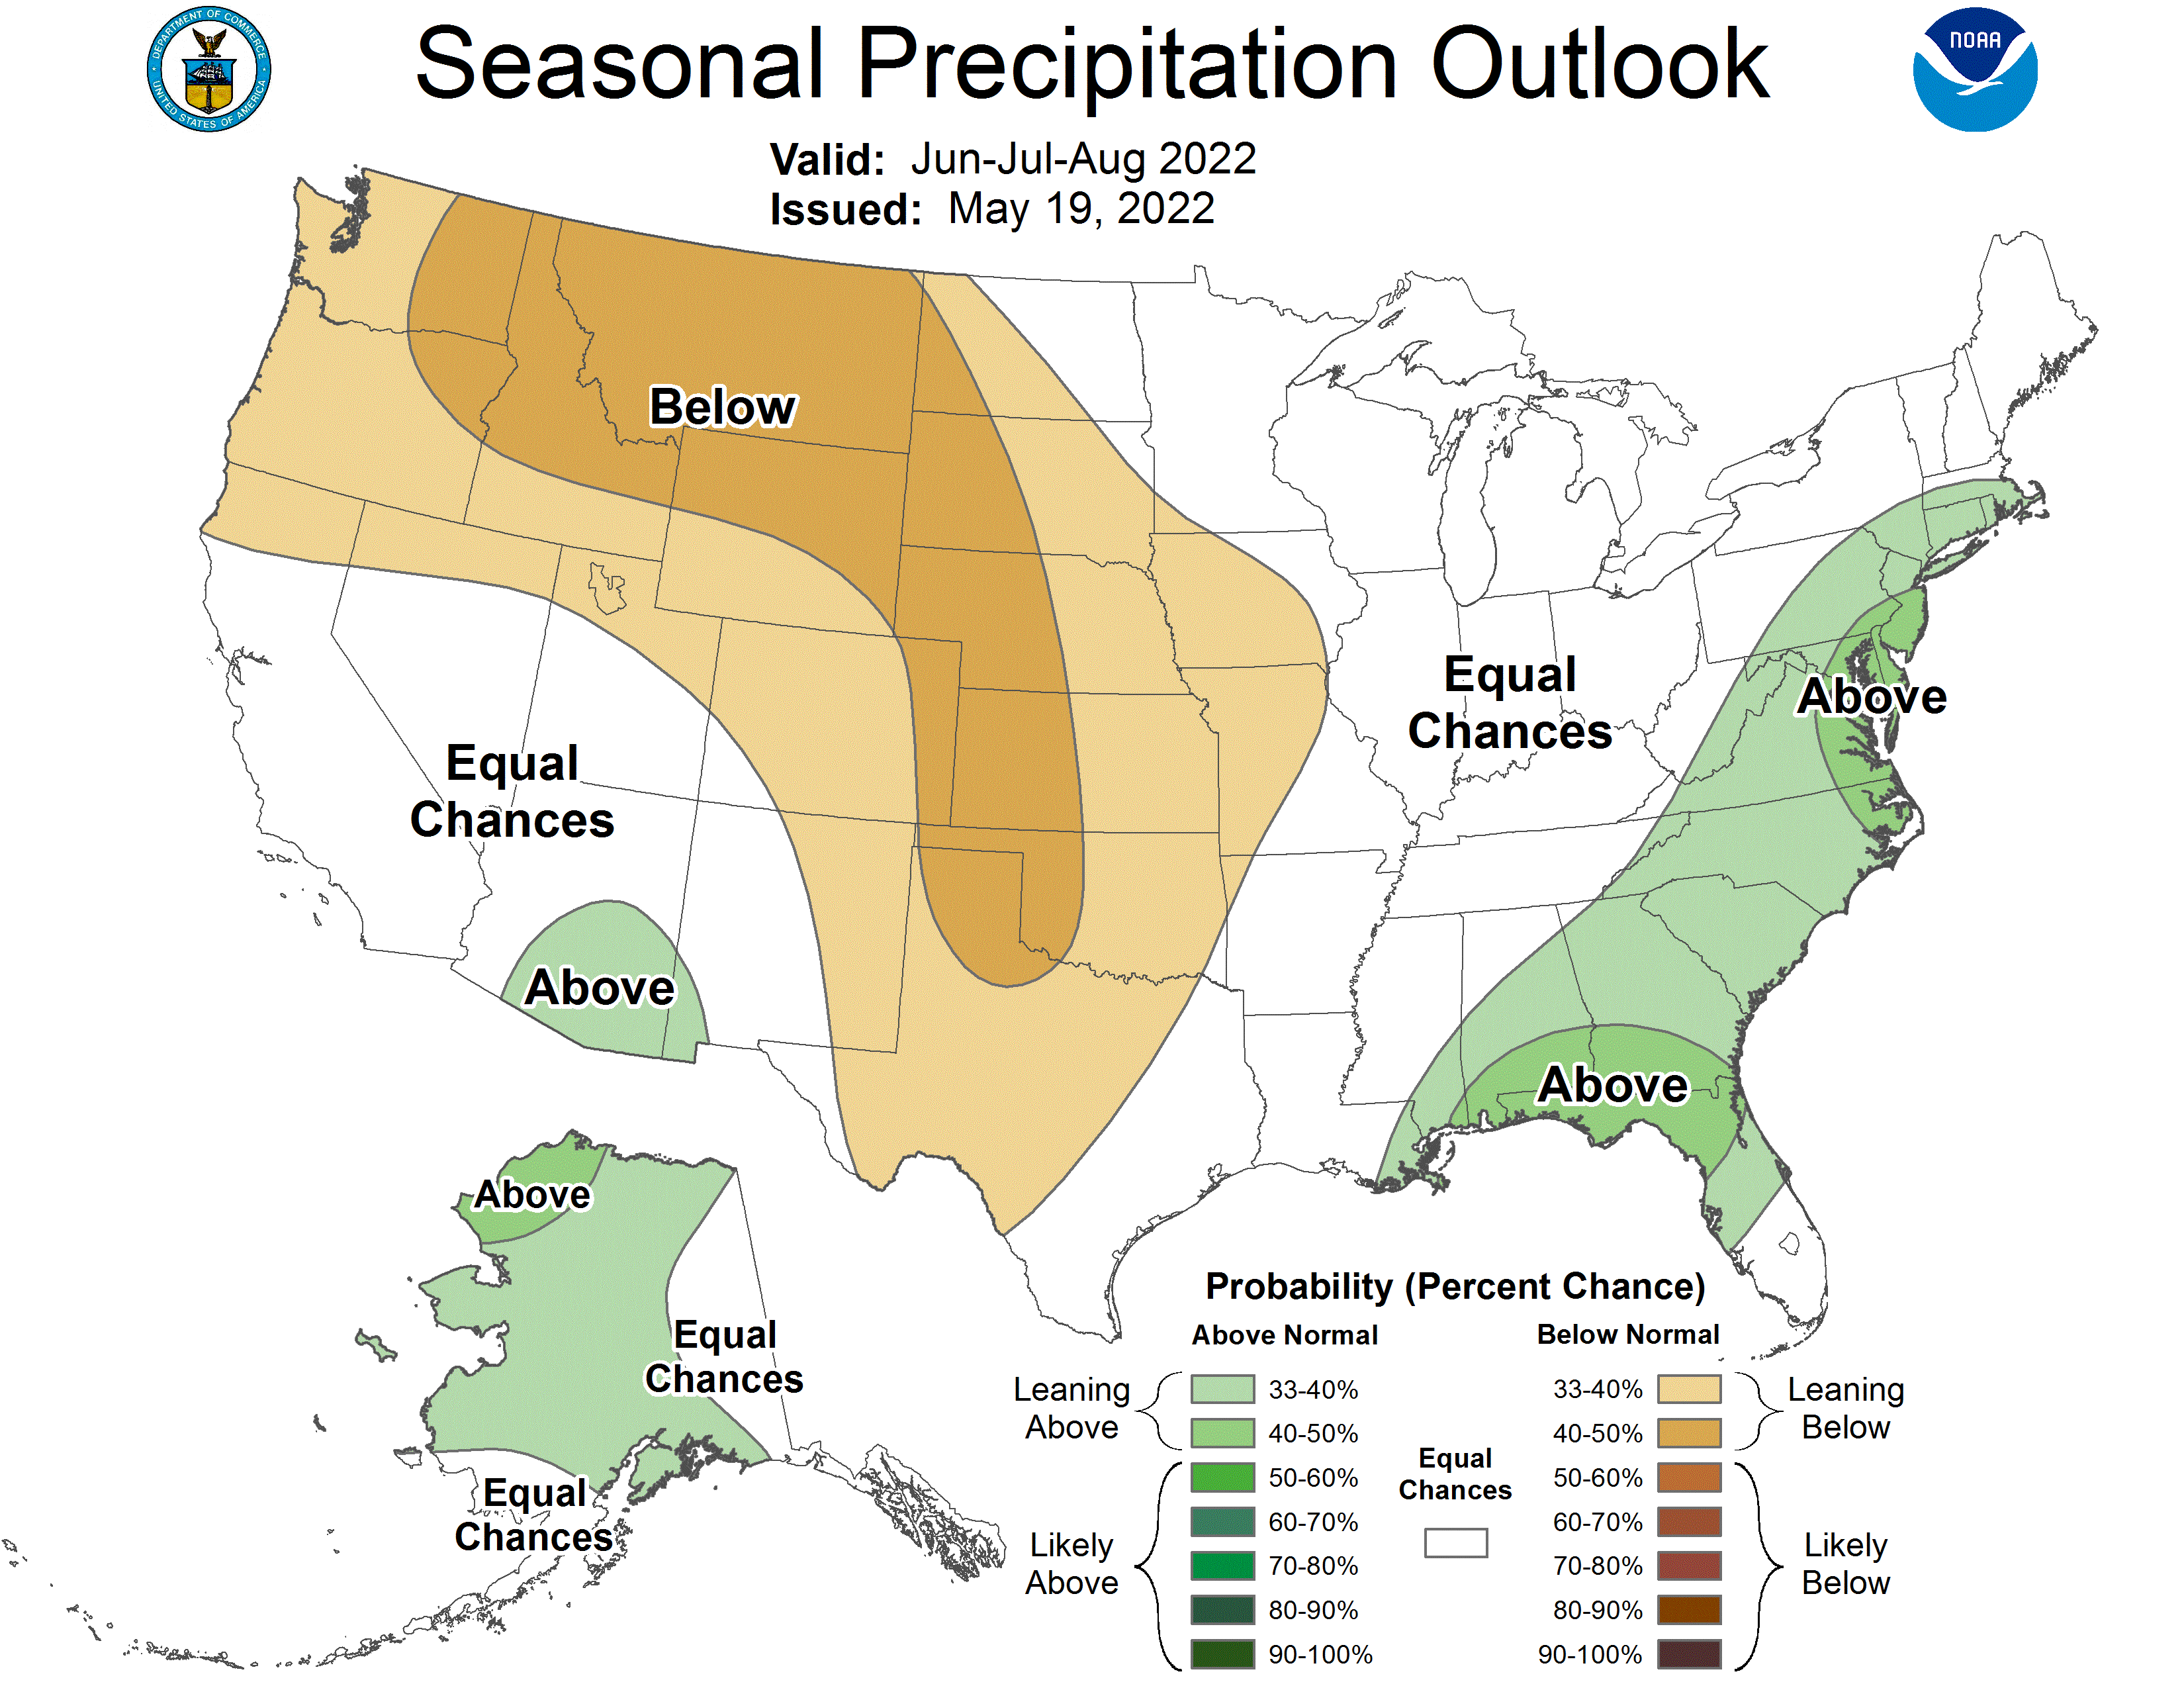 United States Map showing precipitation outlook for June through August 2022. For assistance reading this graphic and data set, please call SDSU Extension at 605-688-4792.